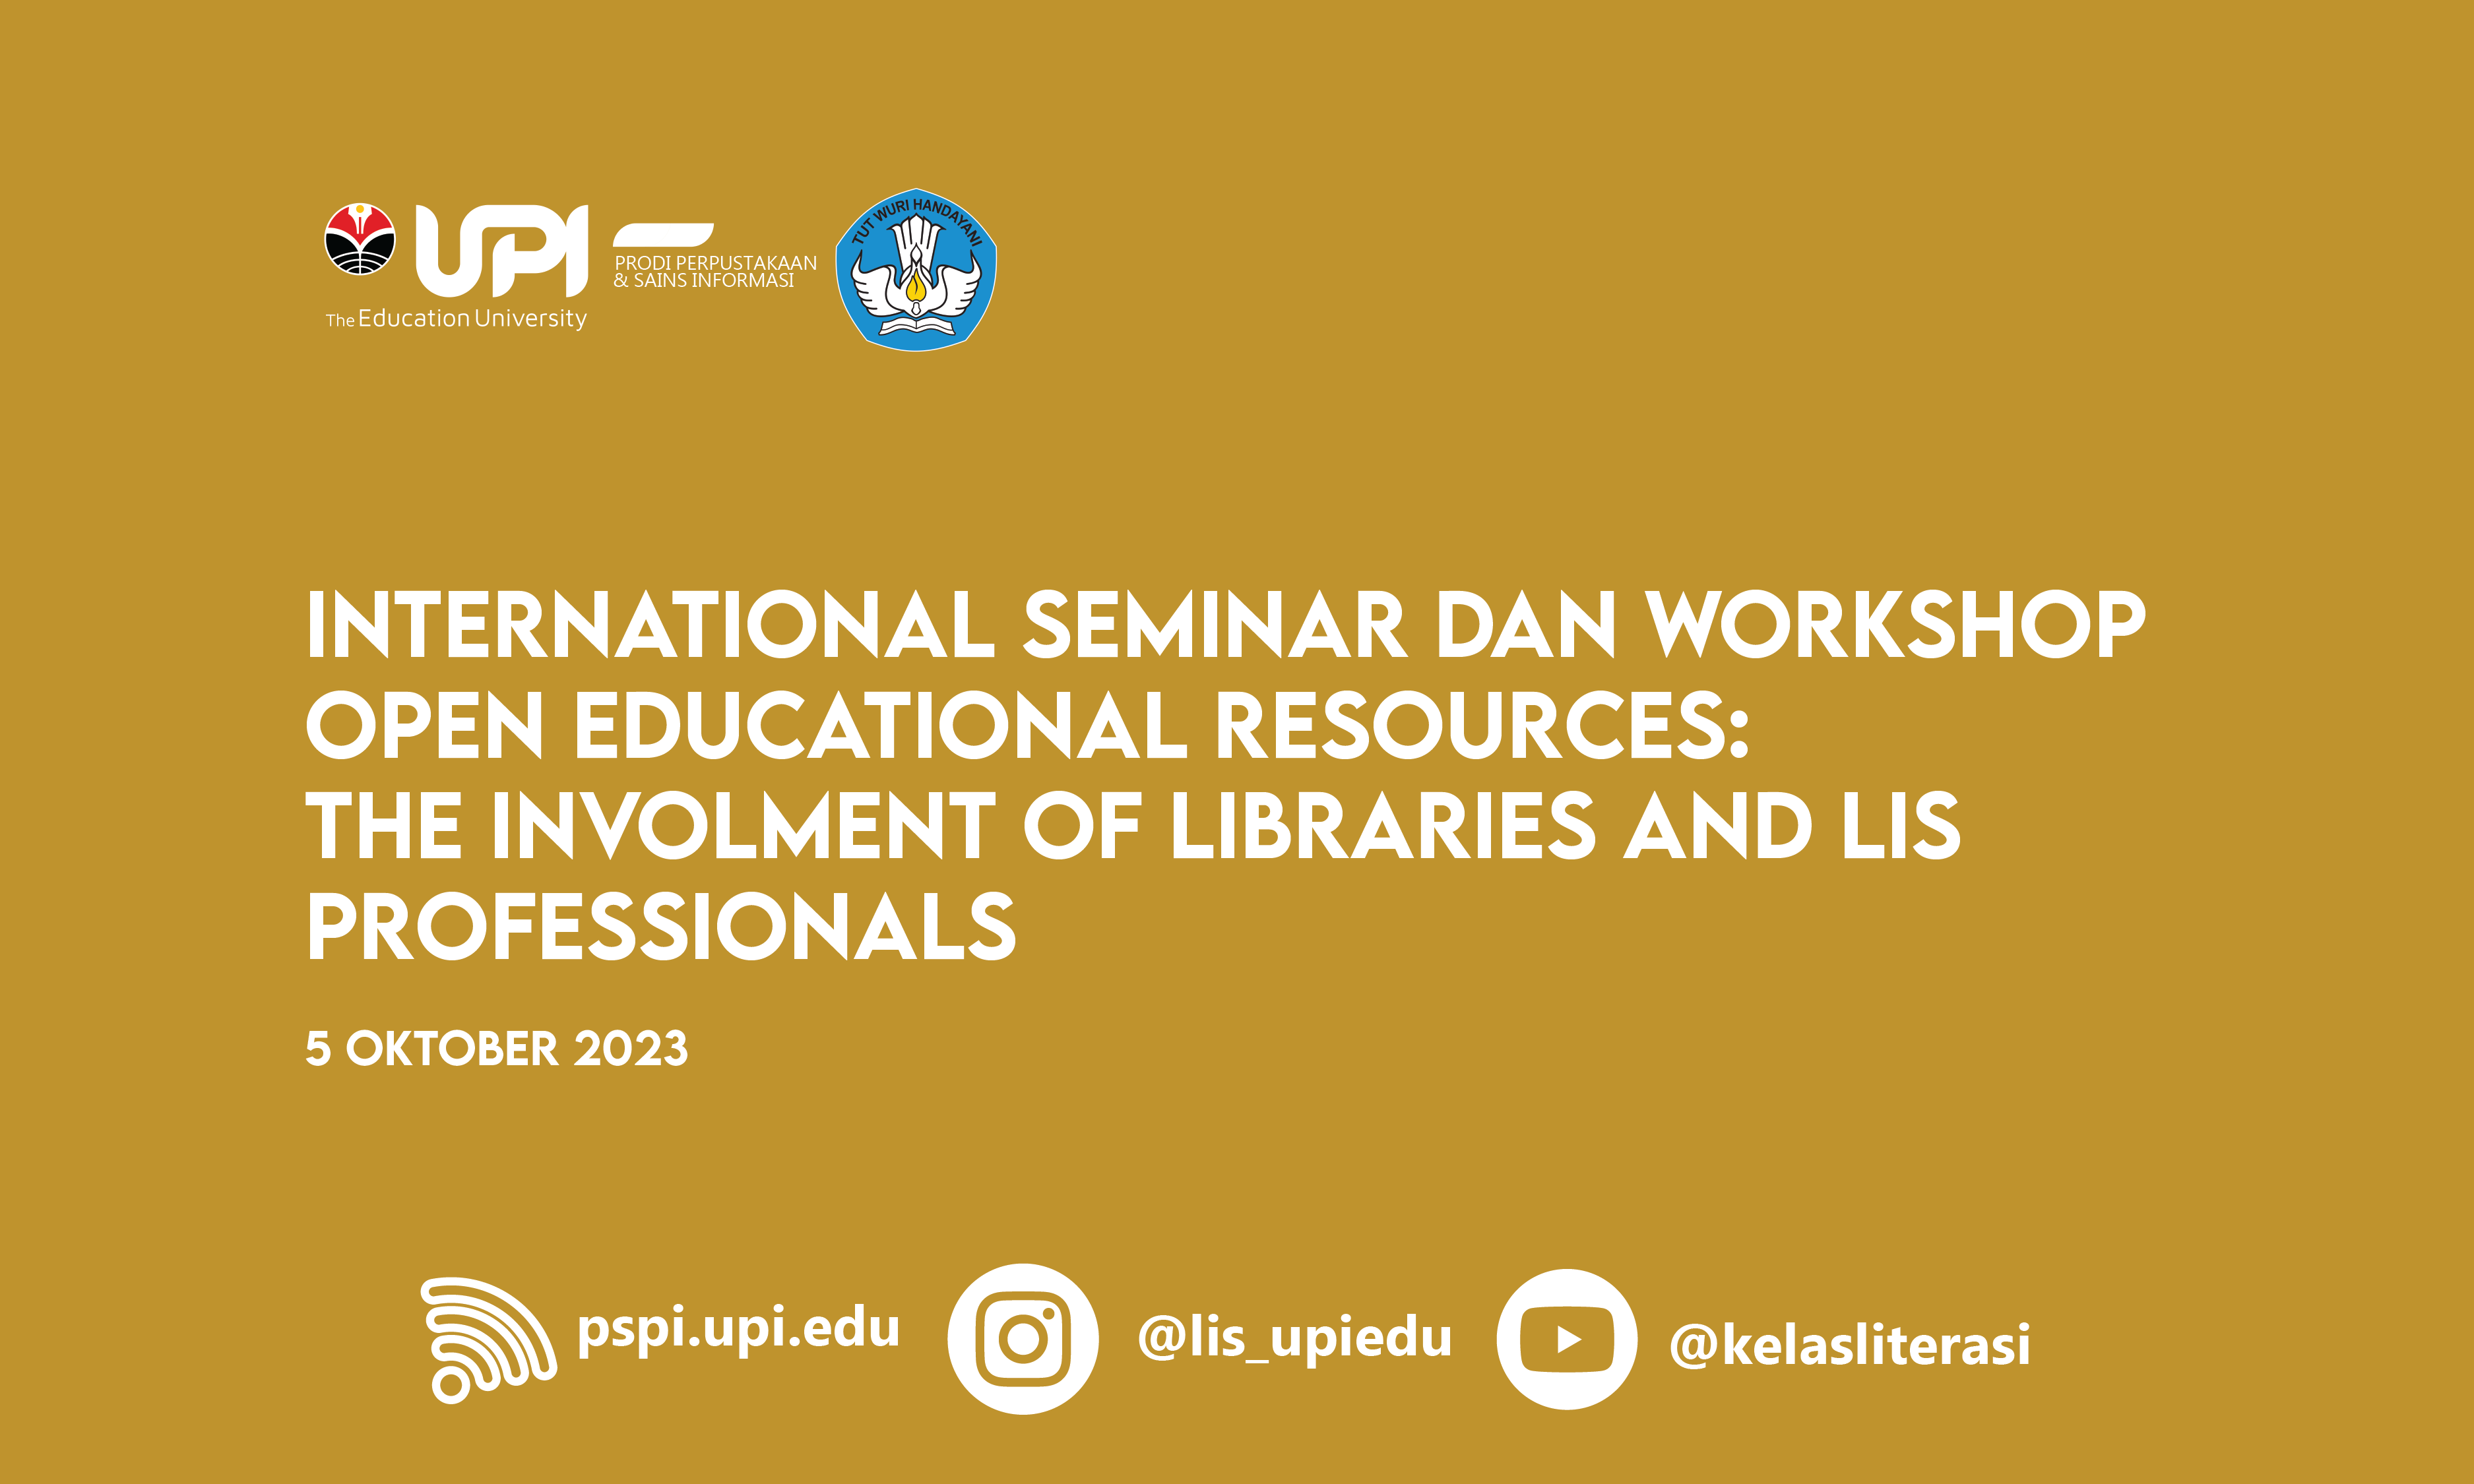 INTERNATIONAL SEMINAR AND WORKSHOP: OPEN EDUCATIONAL RESOURCES